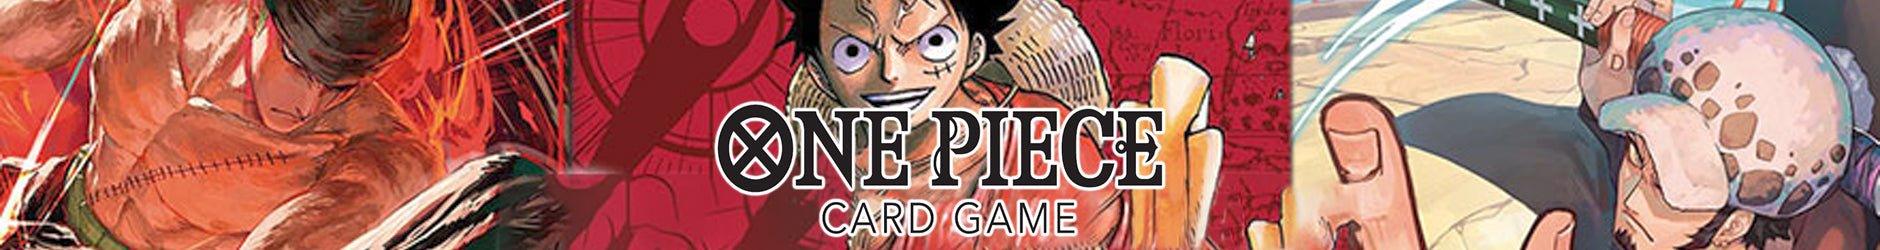 One Piece Featured Products - Romulus Games